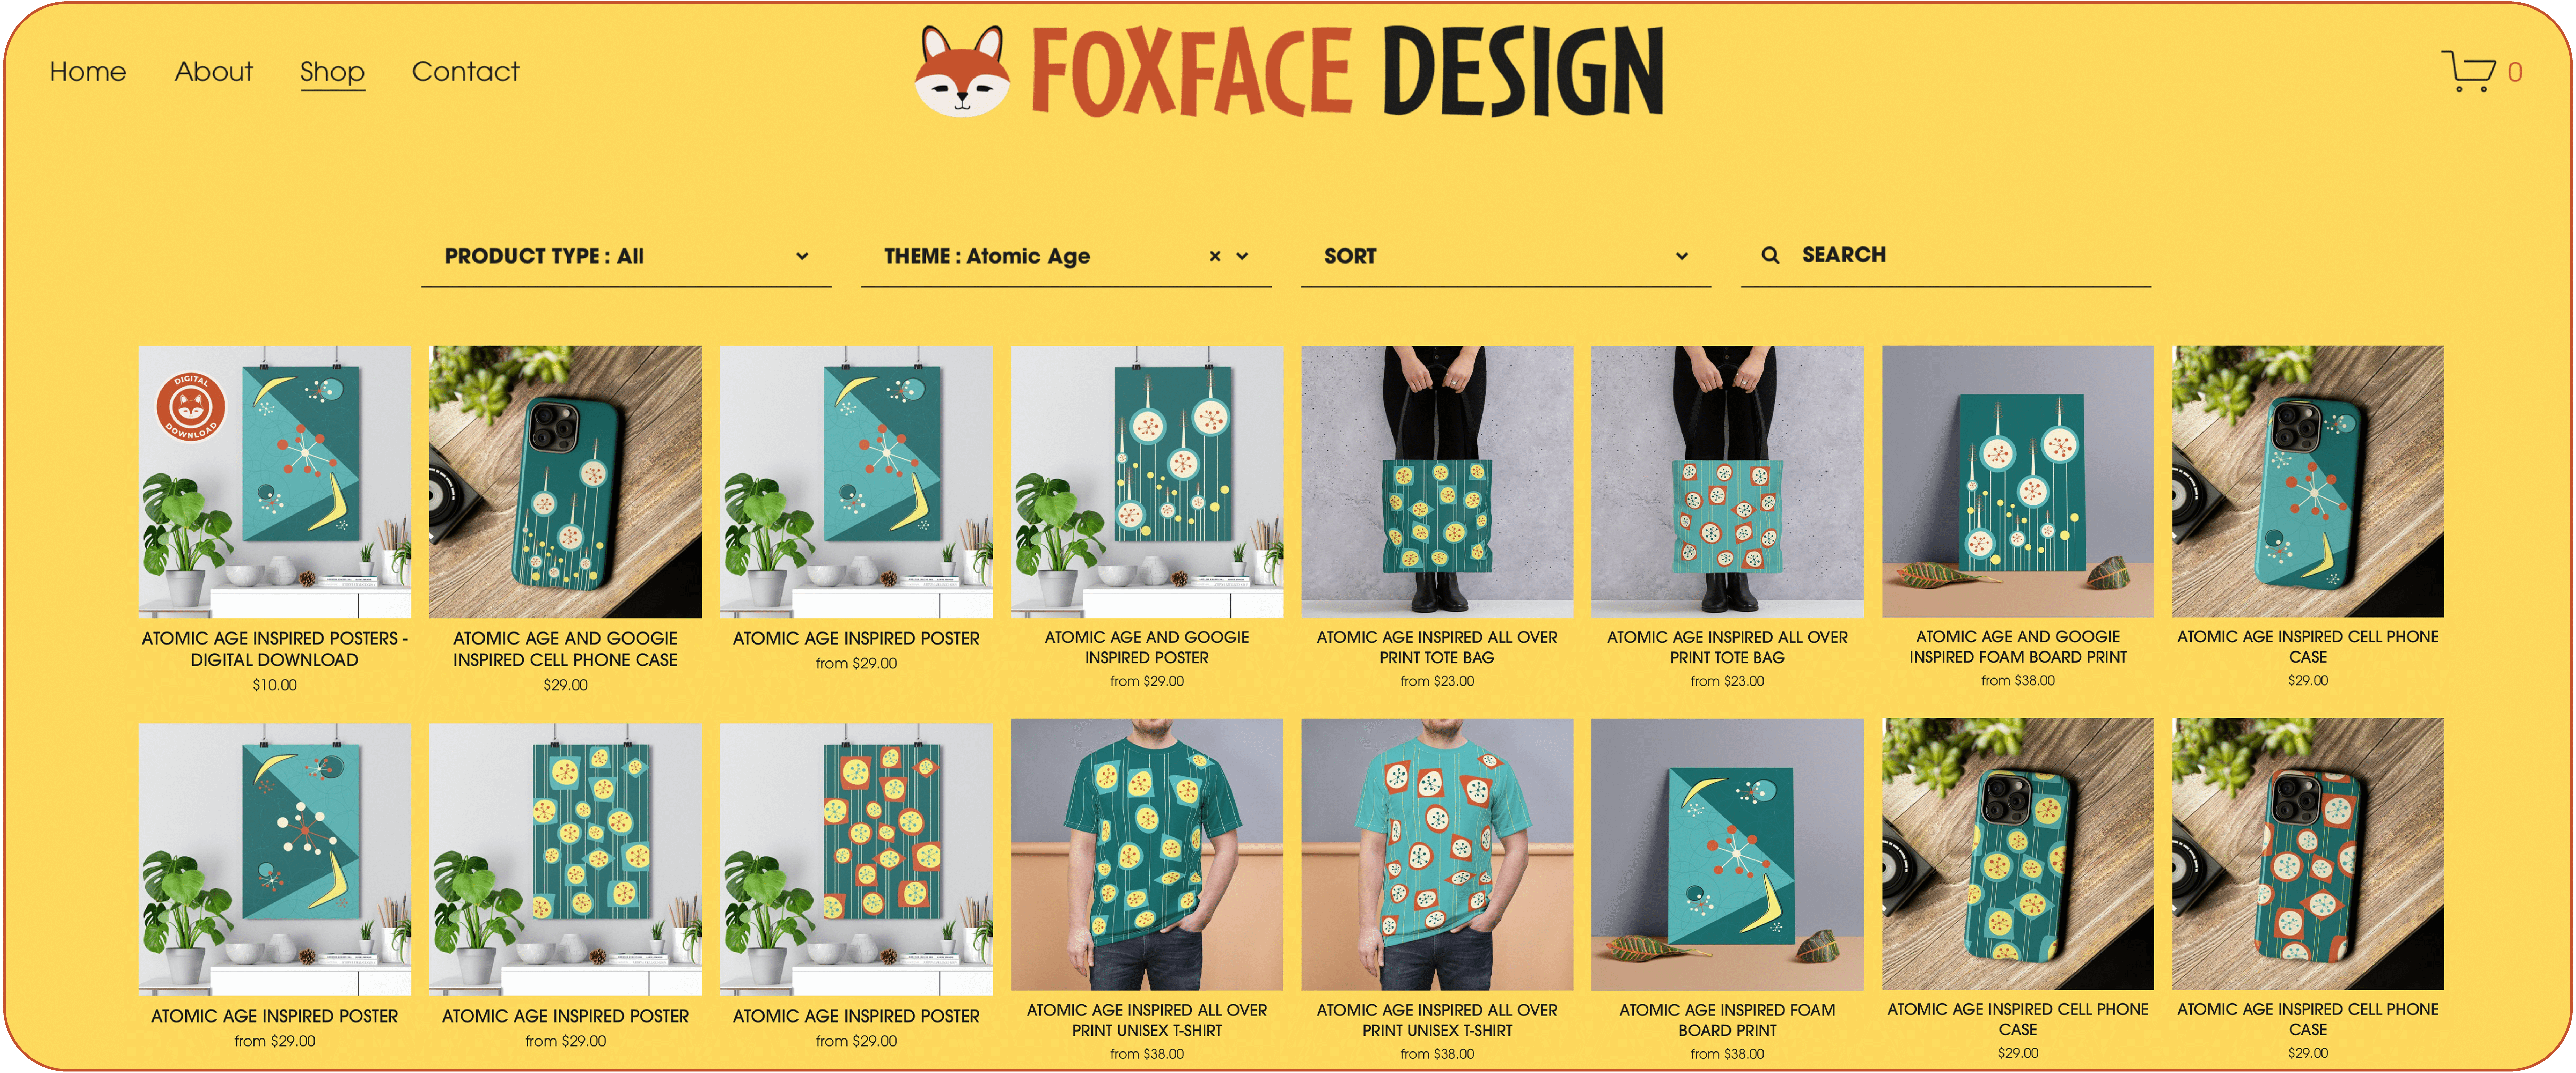 Foxface Design Online Shop logo featuring "FREE USA SHIPPING" label